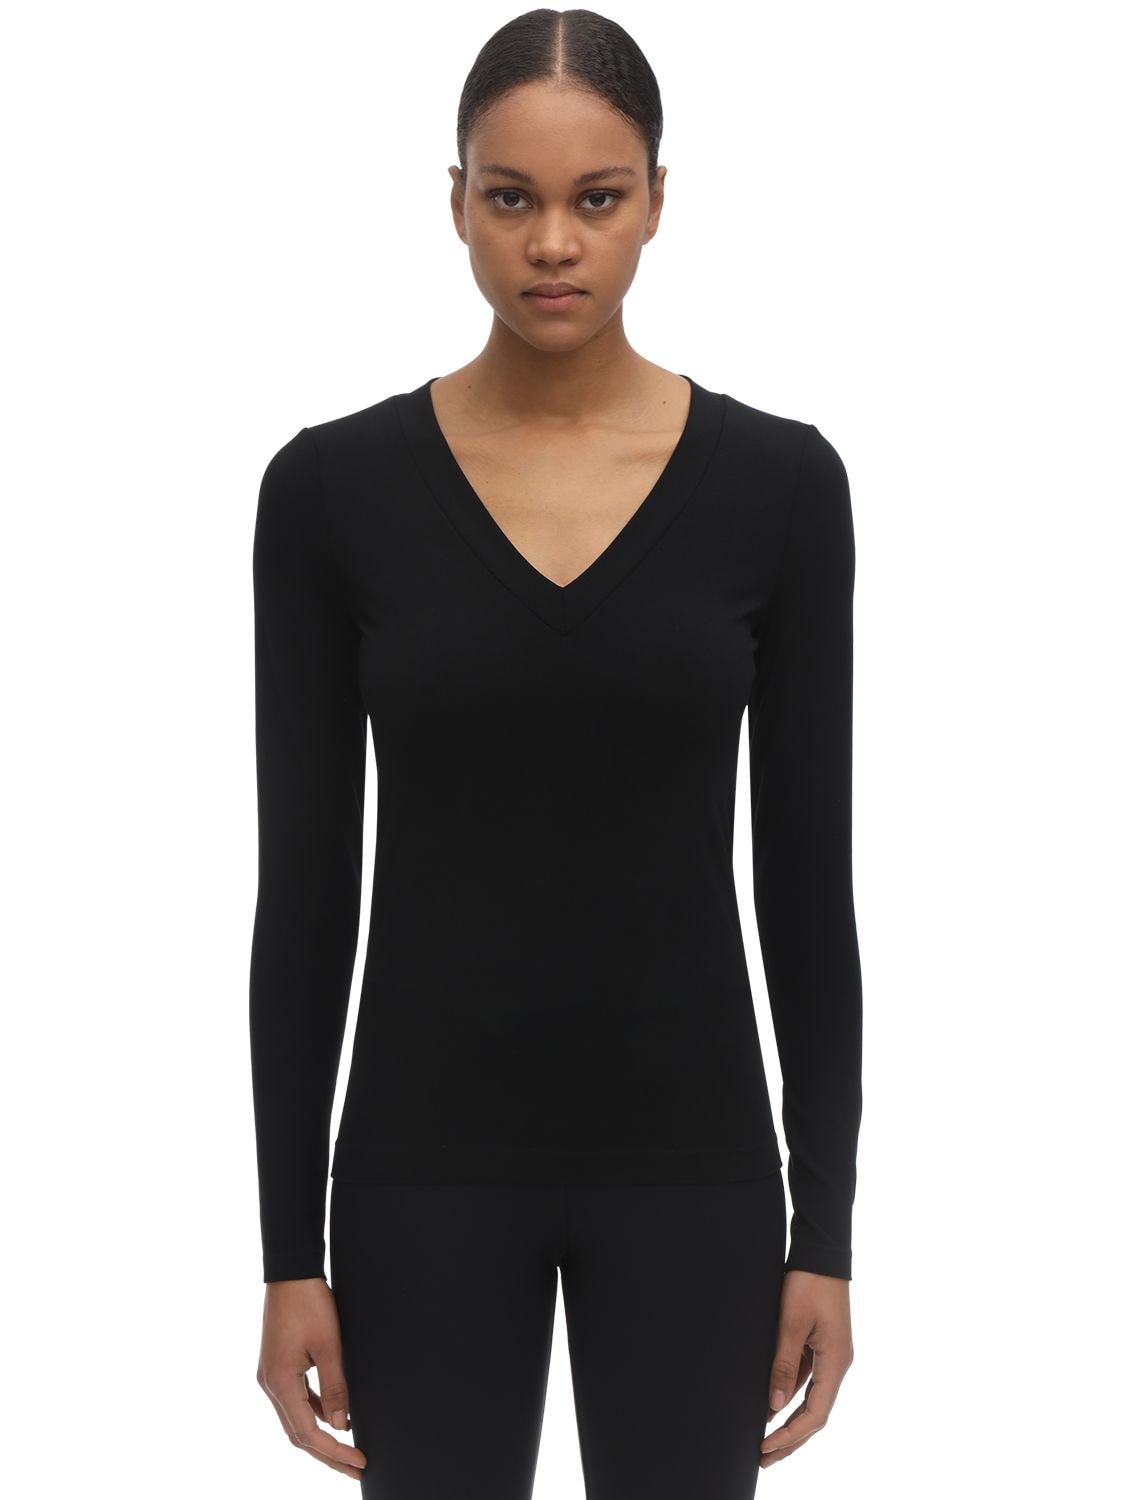 WOLFORD SUSTAINABLE AURORA MODAL V NECK TOP,71IVOP020-NZAWNQ2